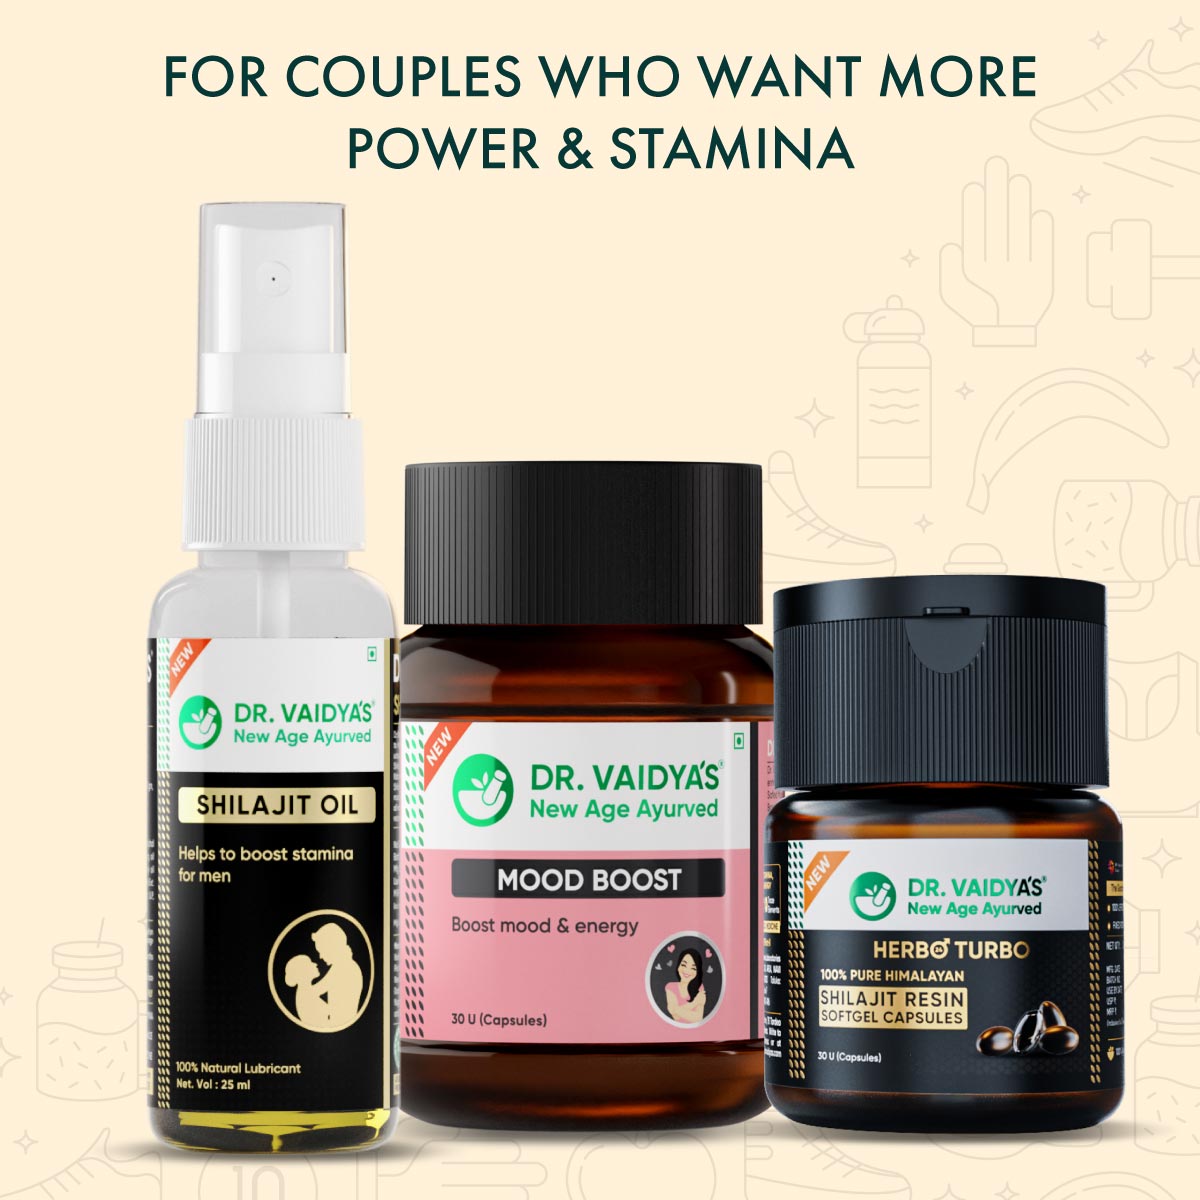 New Honeymoon Pack: With the Power of 100% Himalayan Shilajit